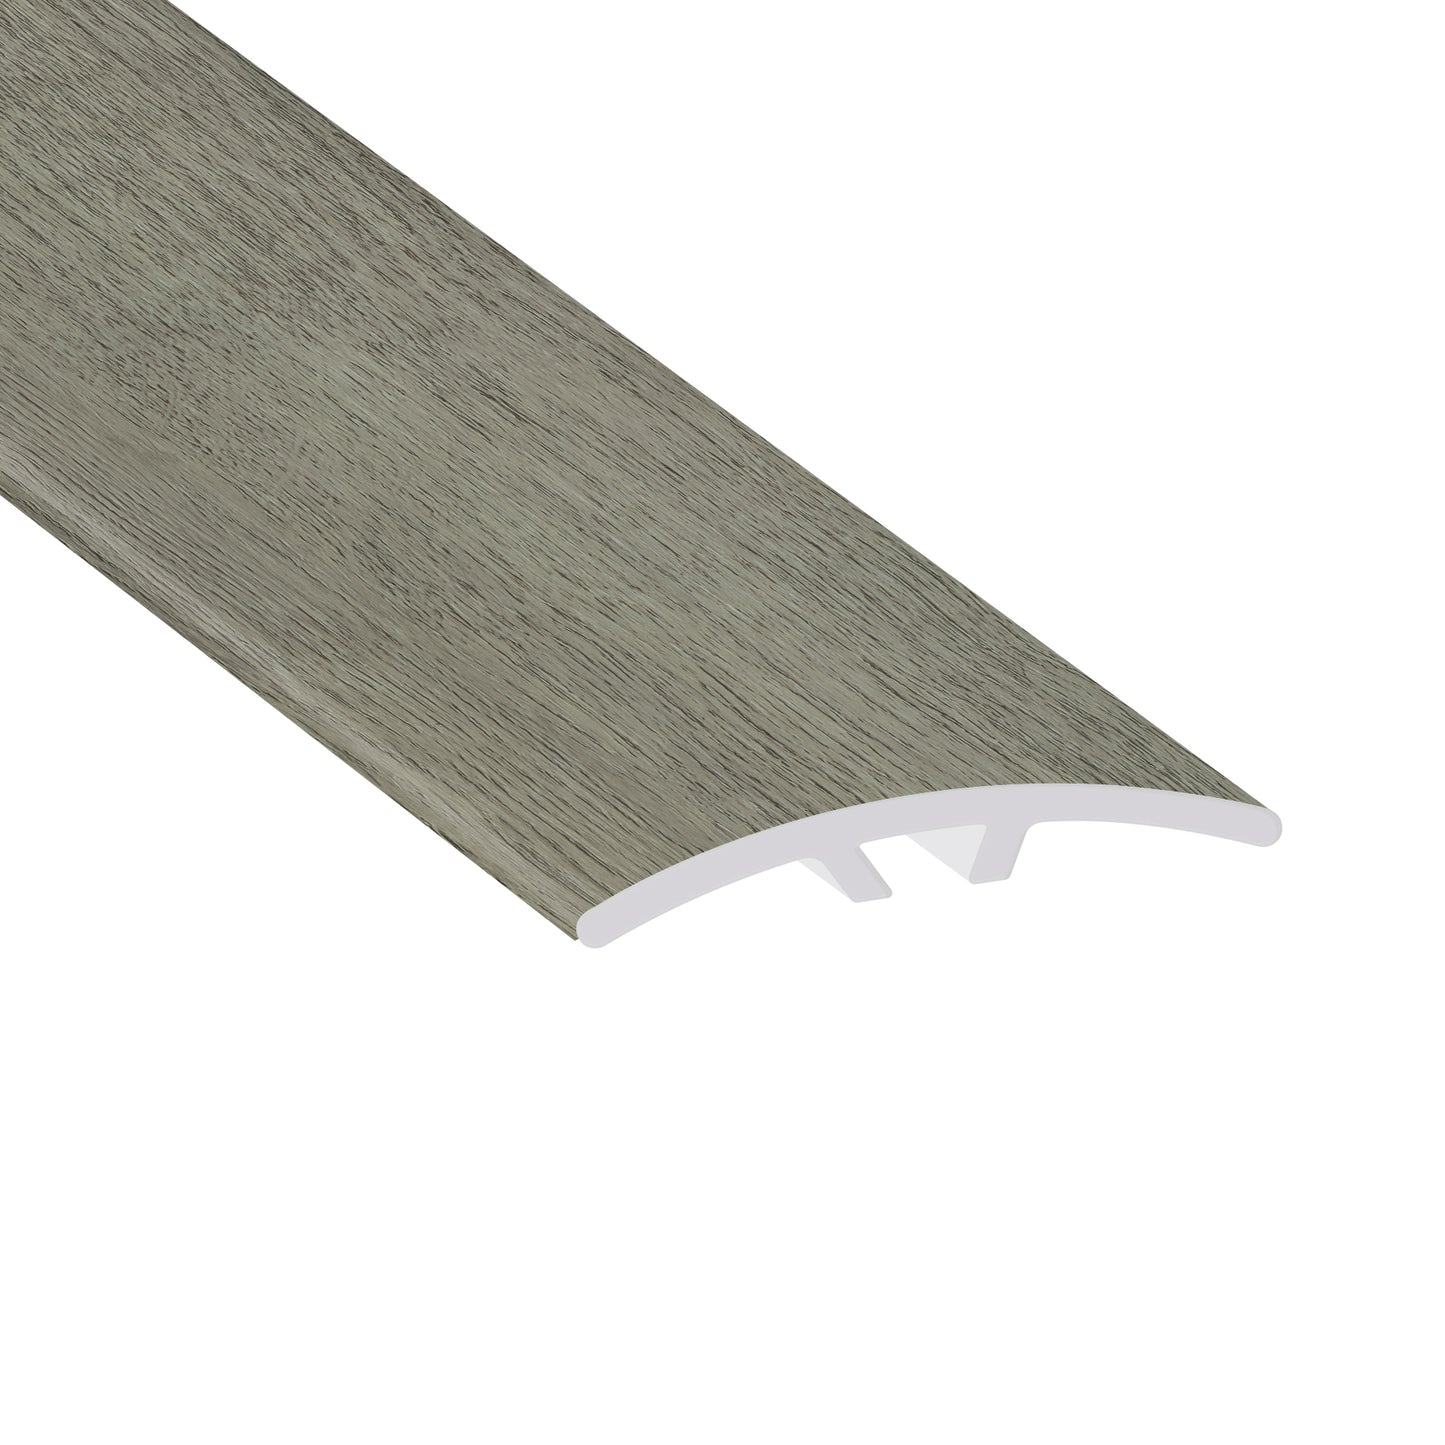 Windswept 0.23 in. Thich x 1.59 in. Width x 94 in. Length Multi-Purpose Reducer Vinyl Molding